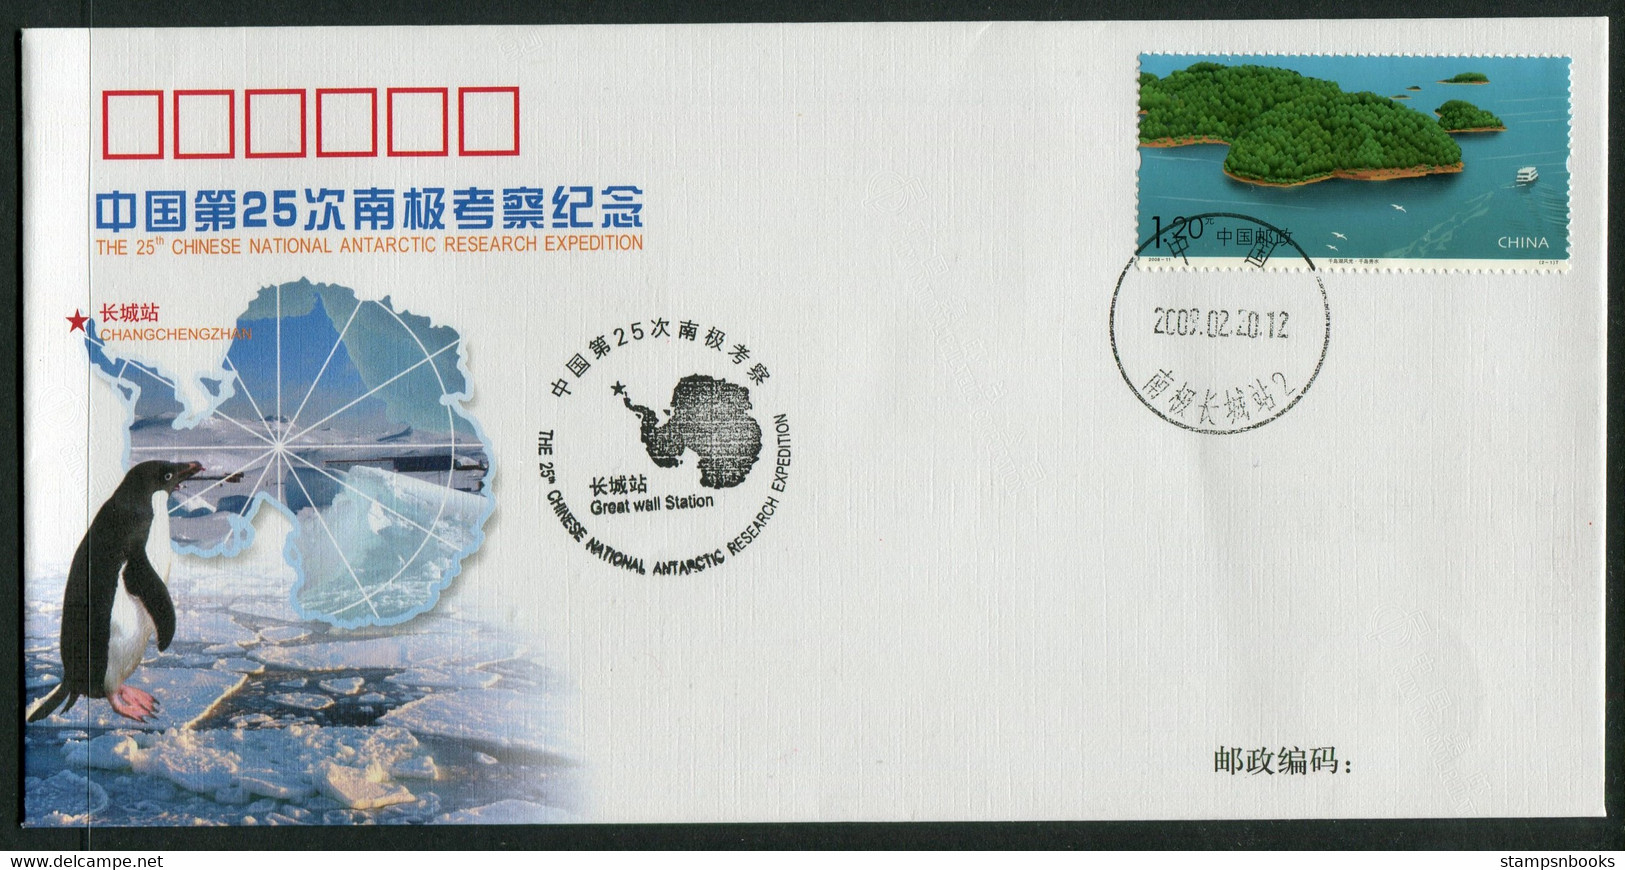 2008/9 China 25th Chinese National Antarctic Research Expedition X 3 Polar Antarctica Penquin Ship Covers - Programmes Scientifiques